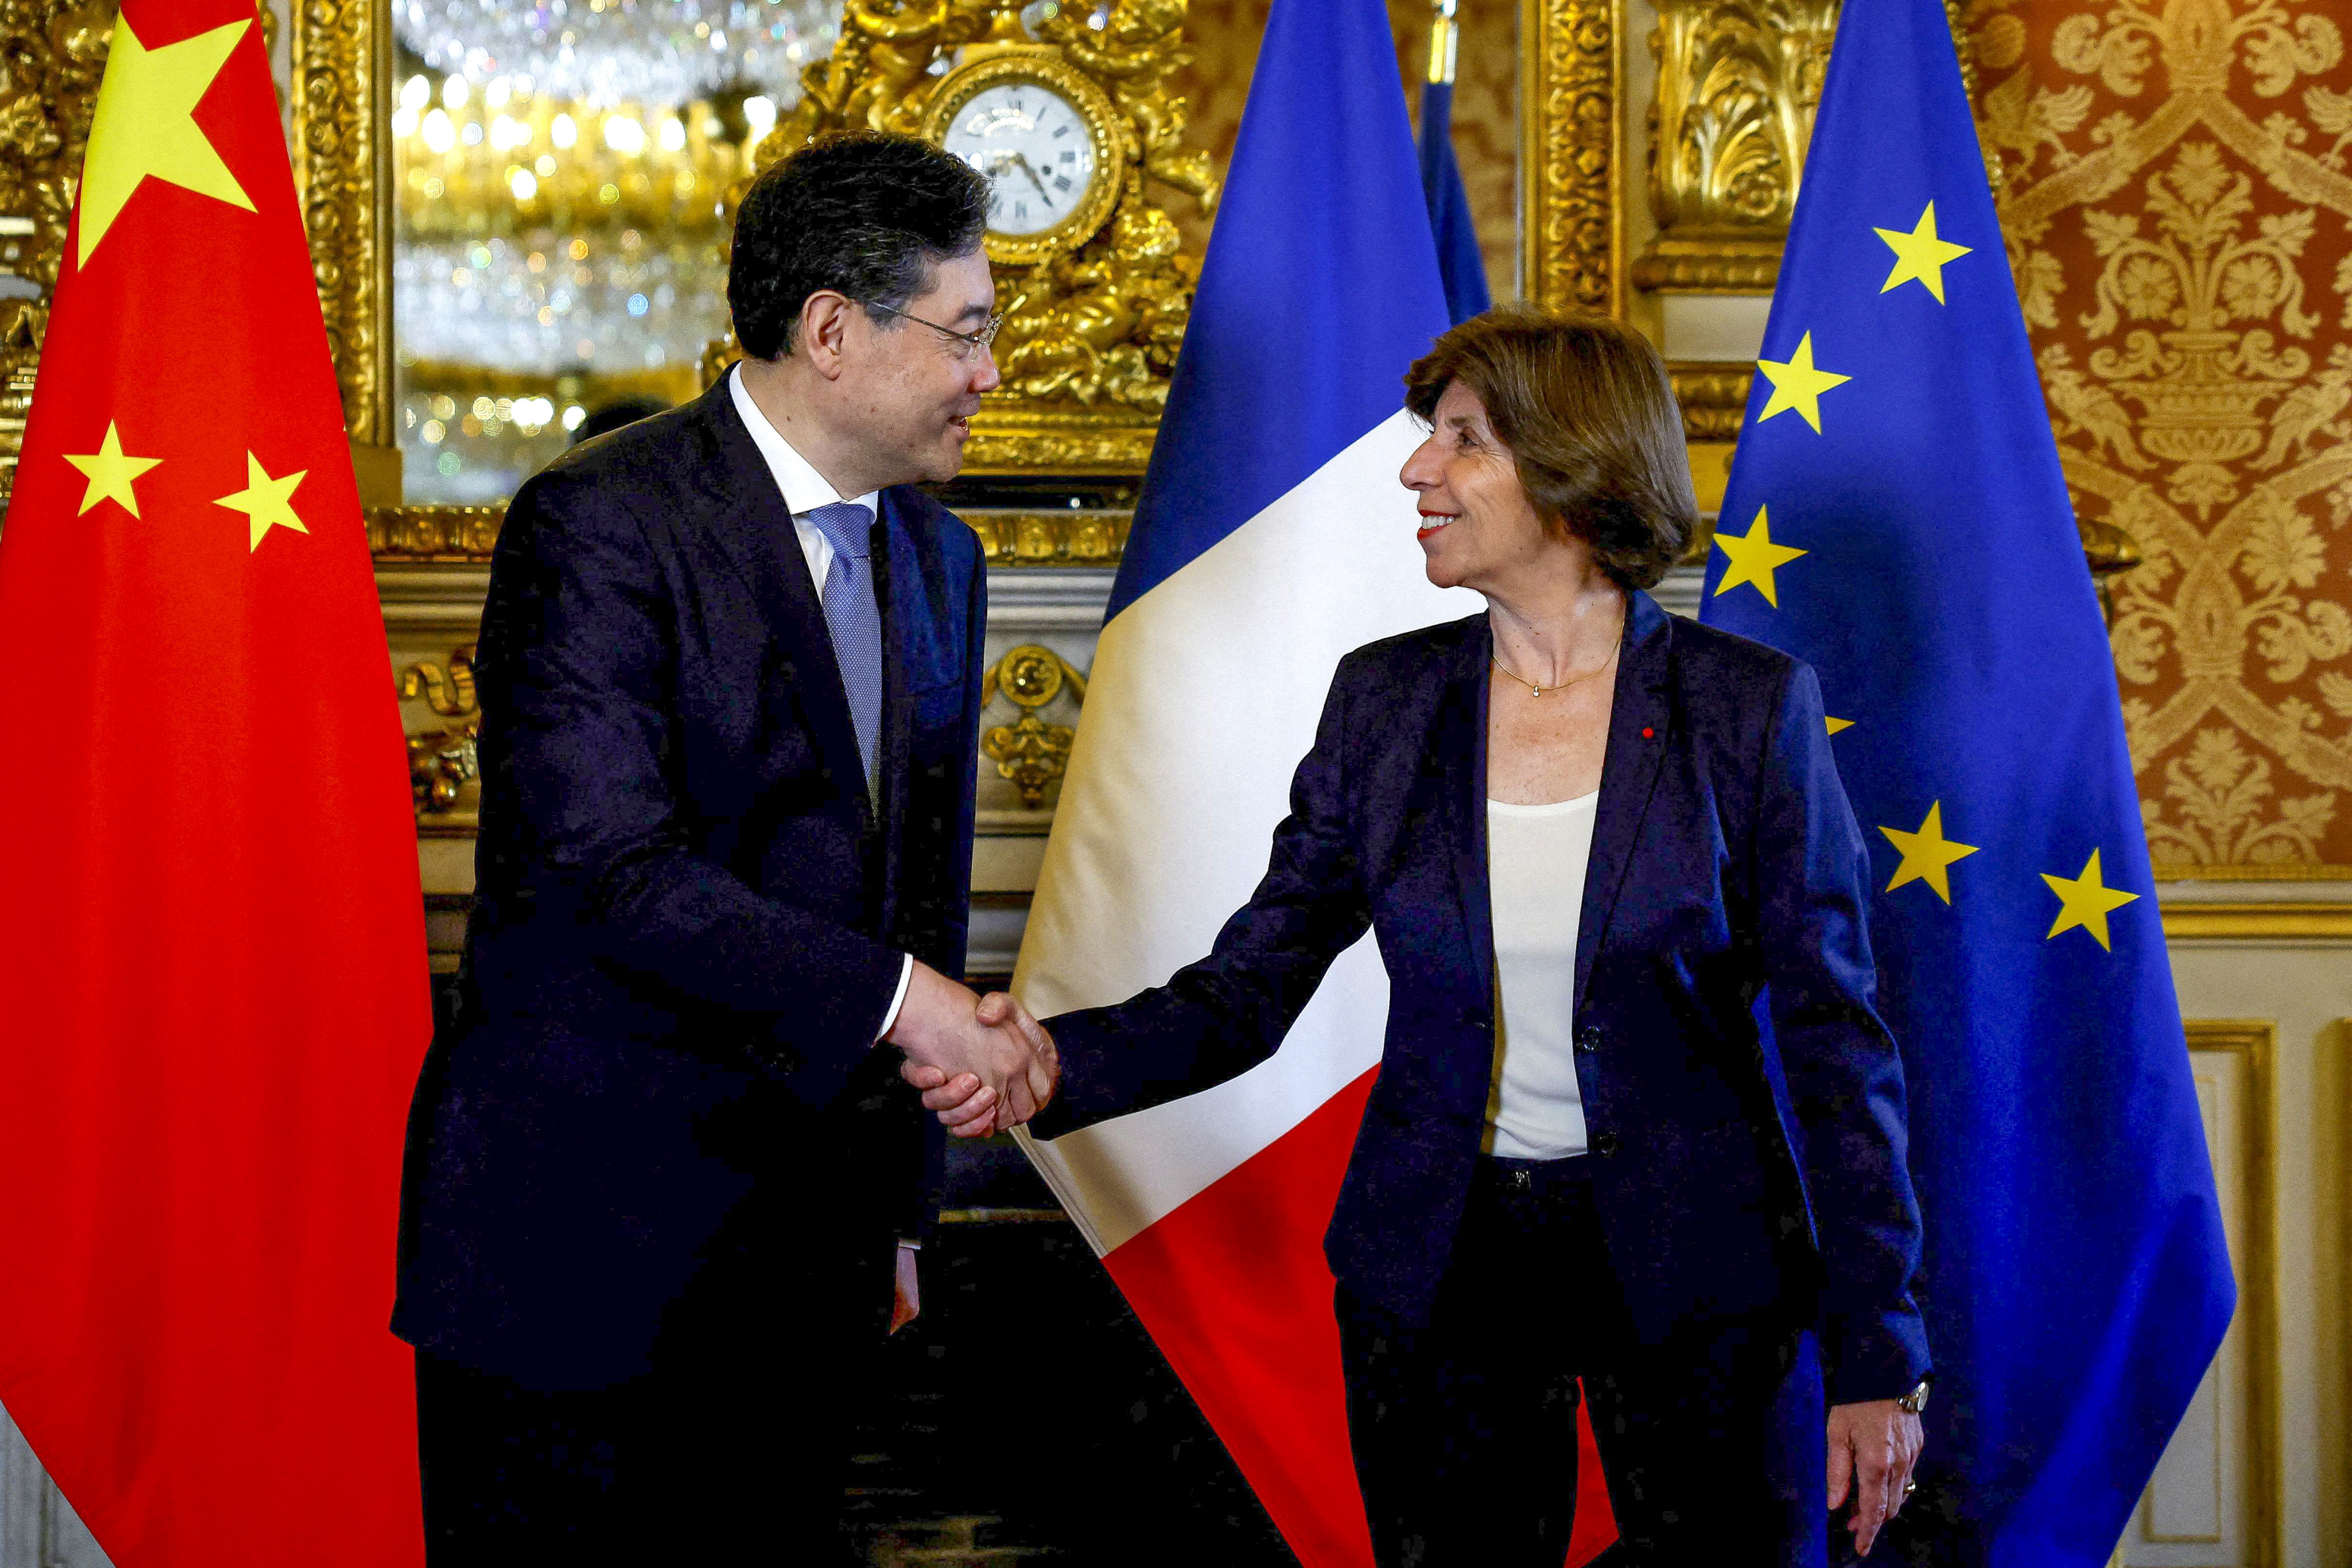 Chinese Foreign Minister Qin Gang meets his French counterpart Catherine Colonna in Paris on Wednesday. Photo: AFP